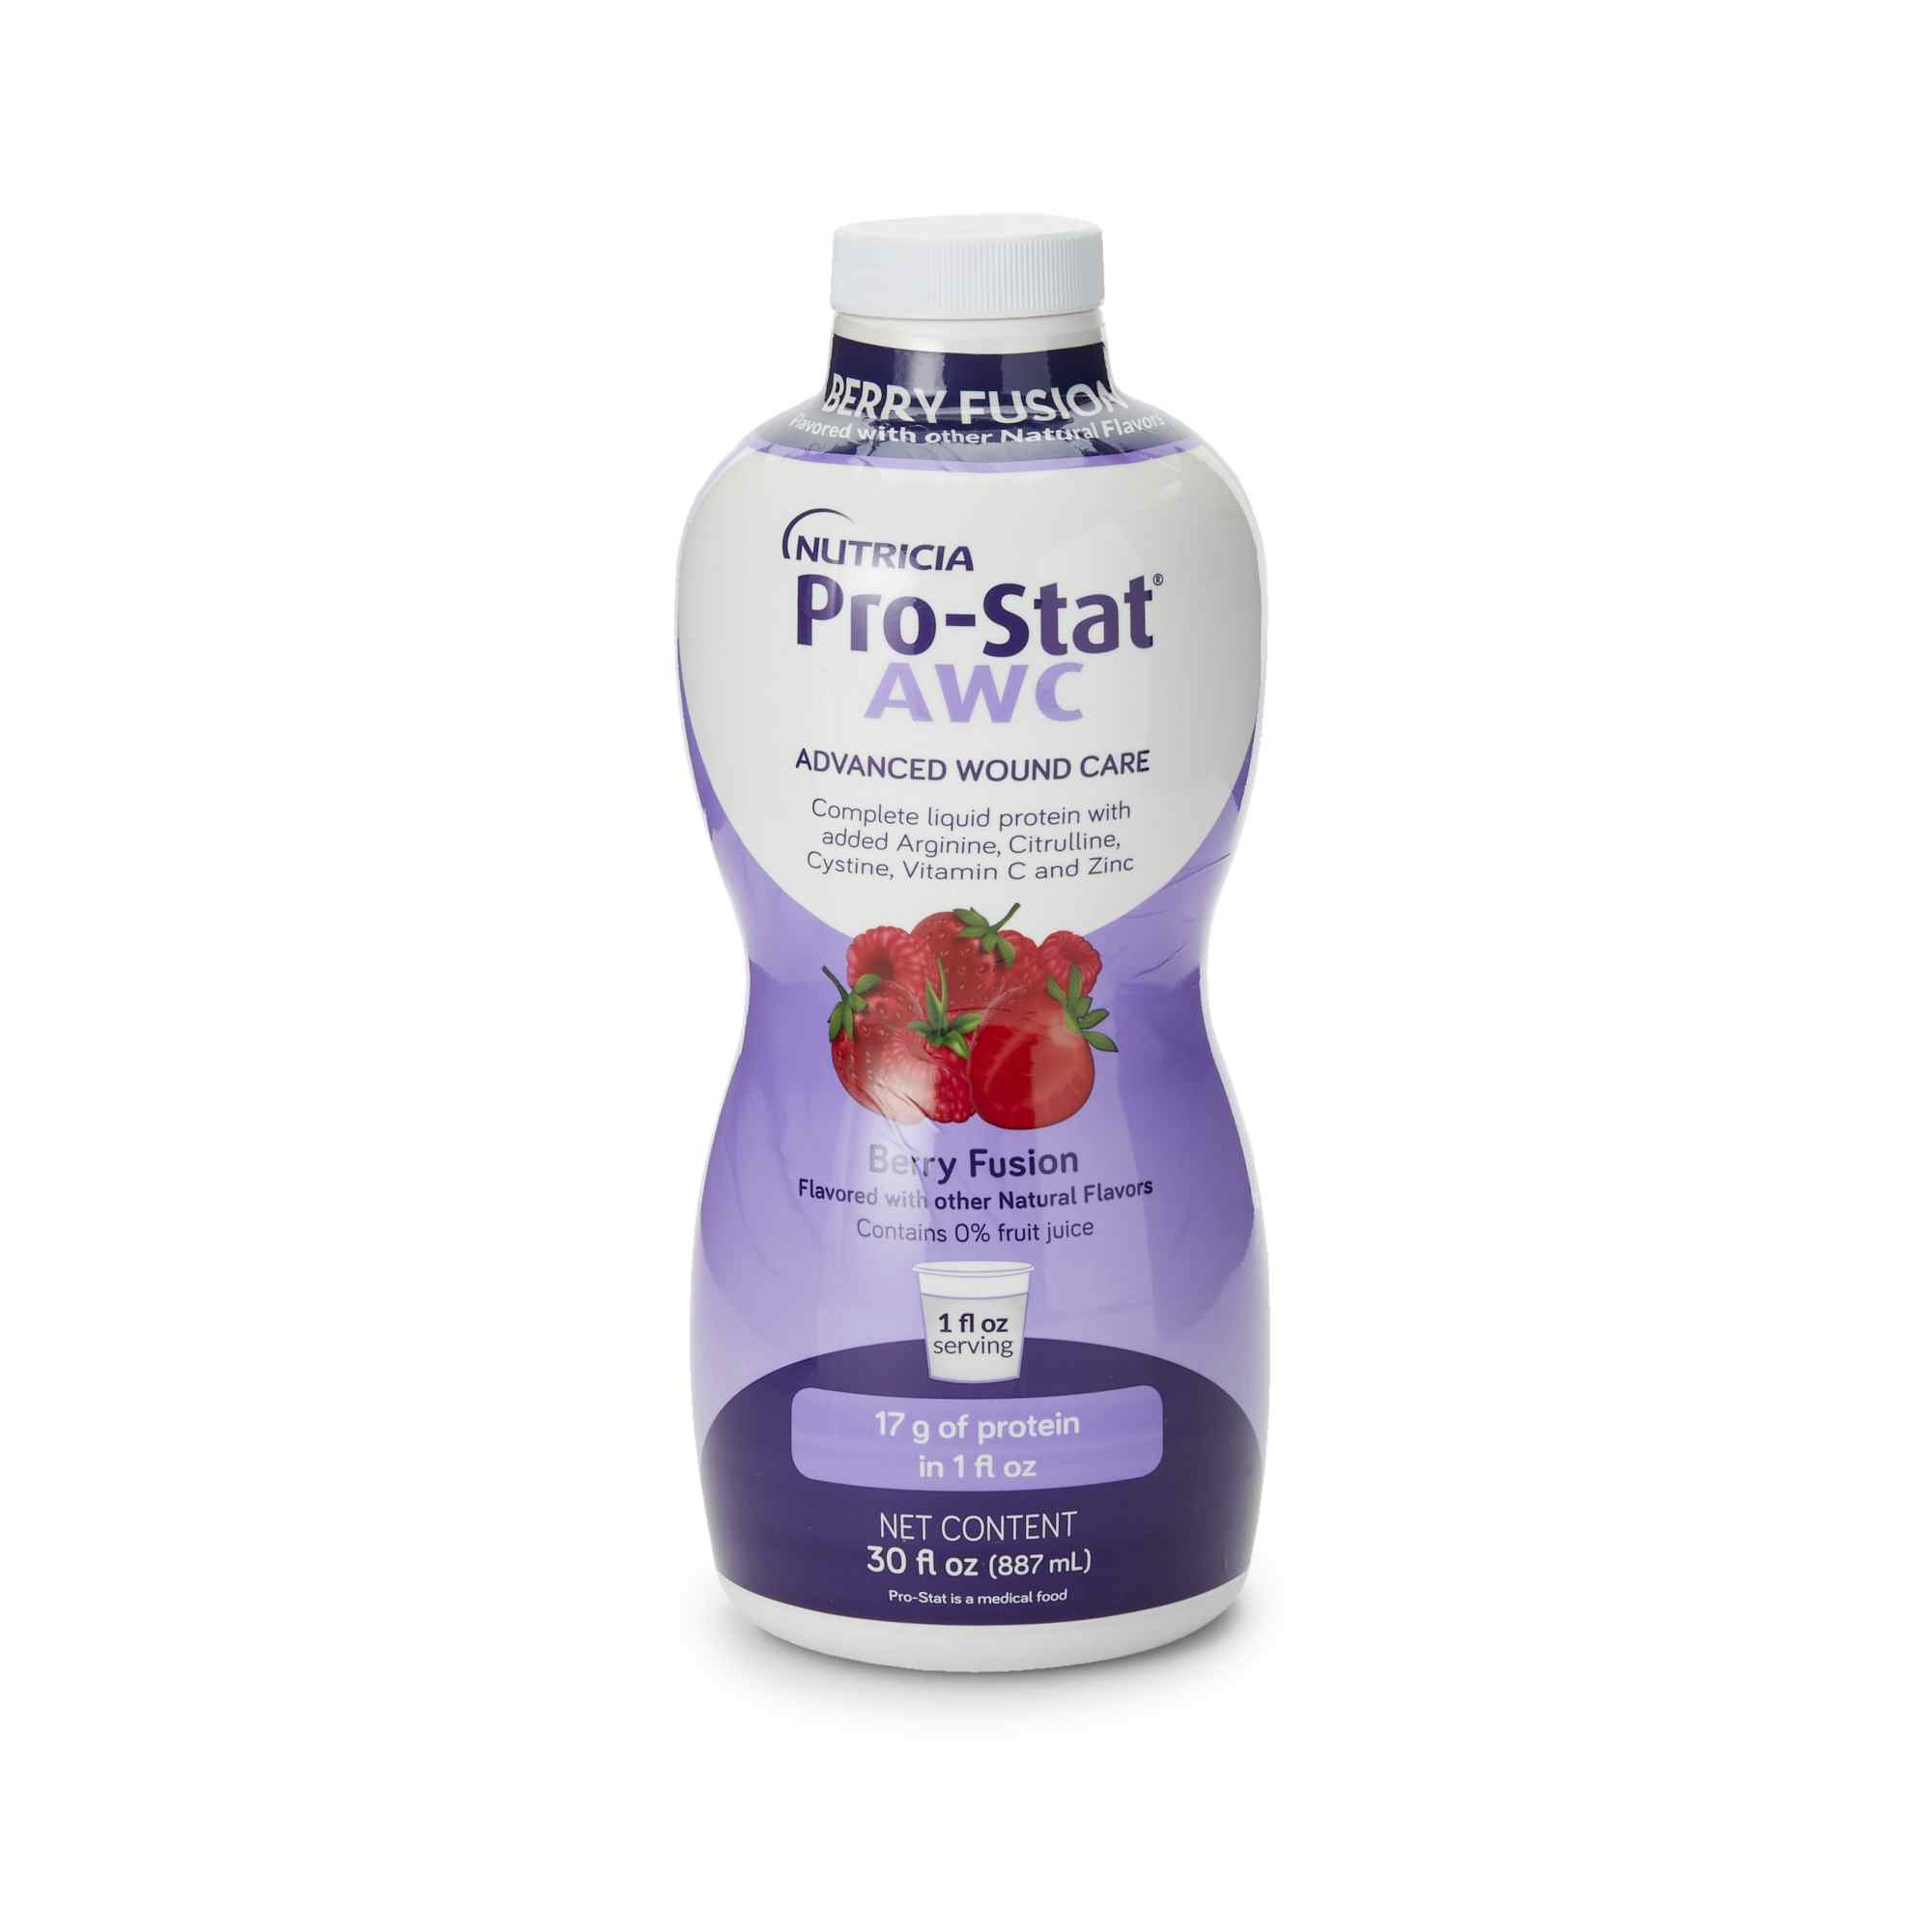 Nutricia Pro-Stat AWC Complete Liquid Protein, Berry Fusion, 30 oz.